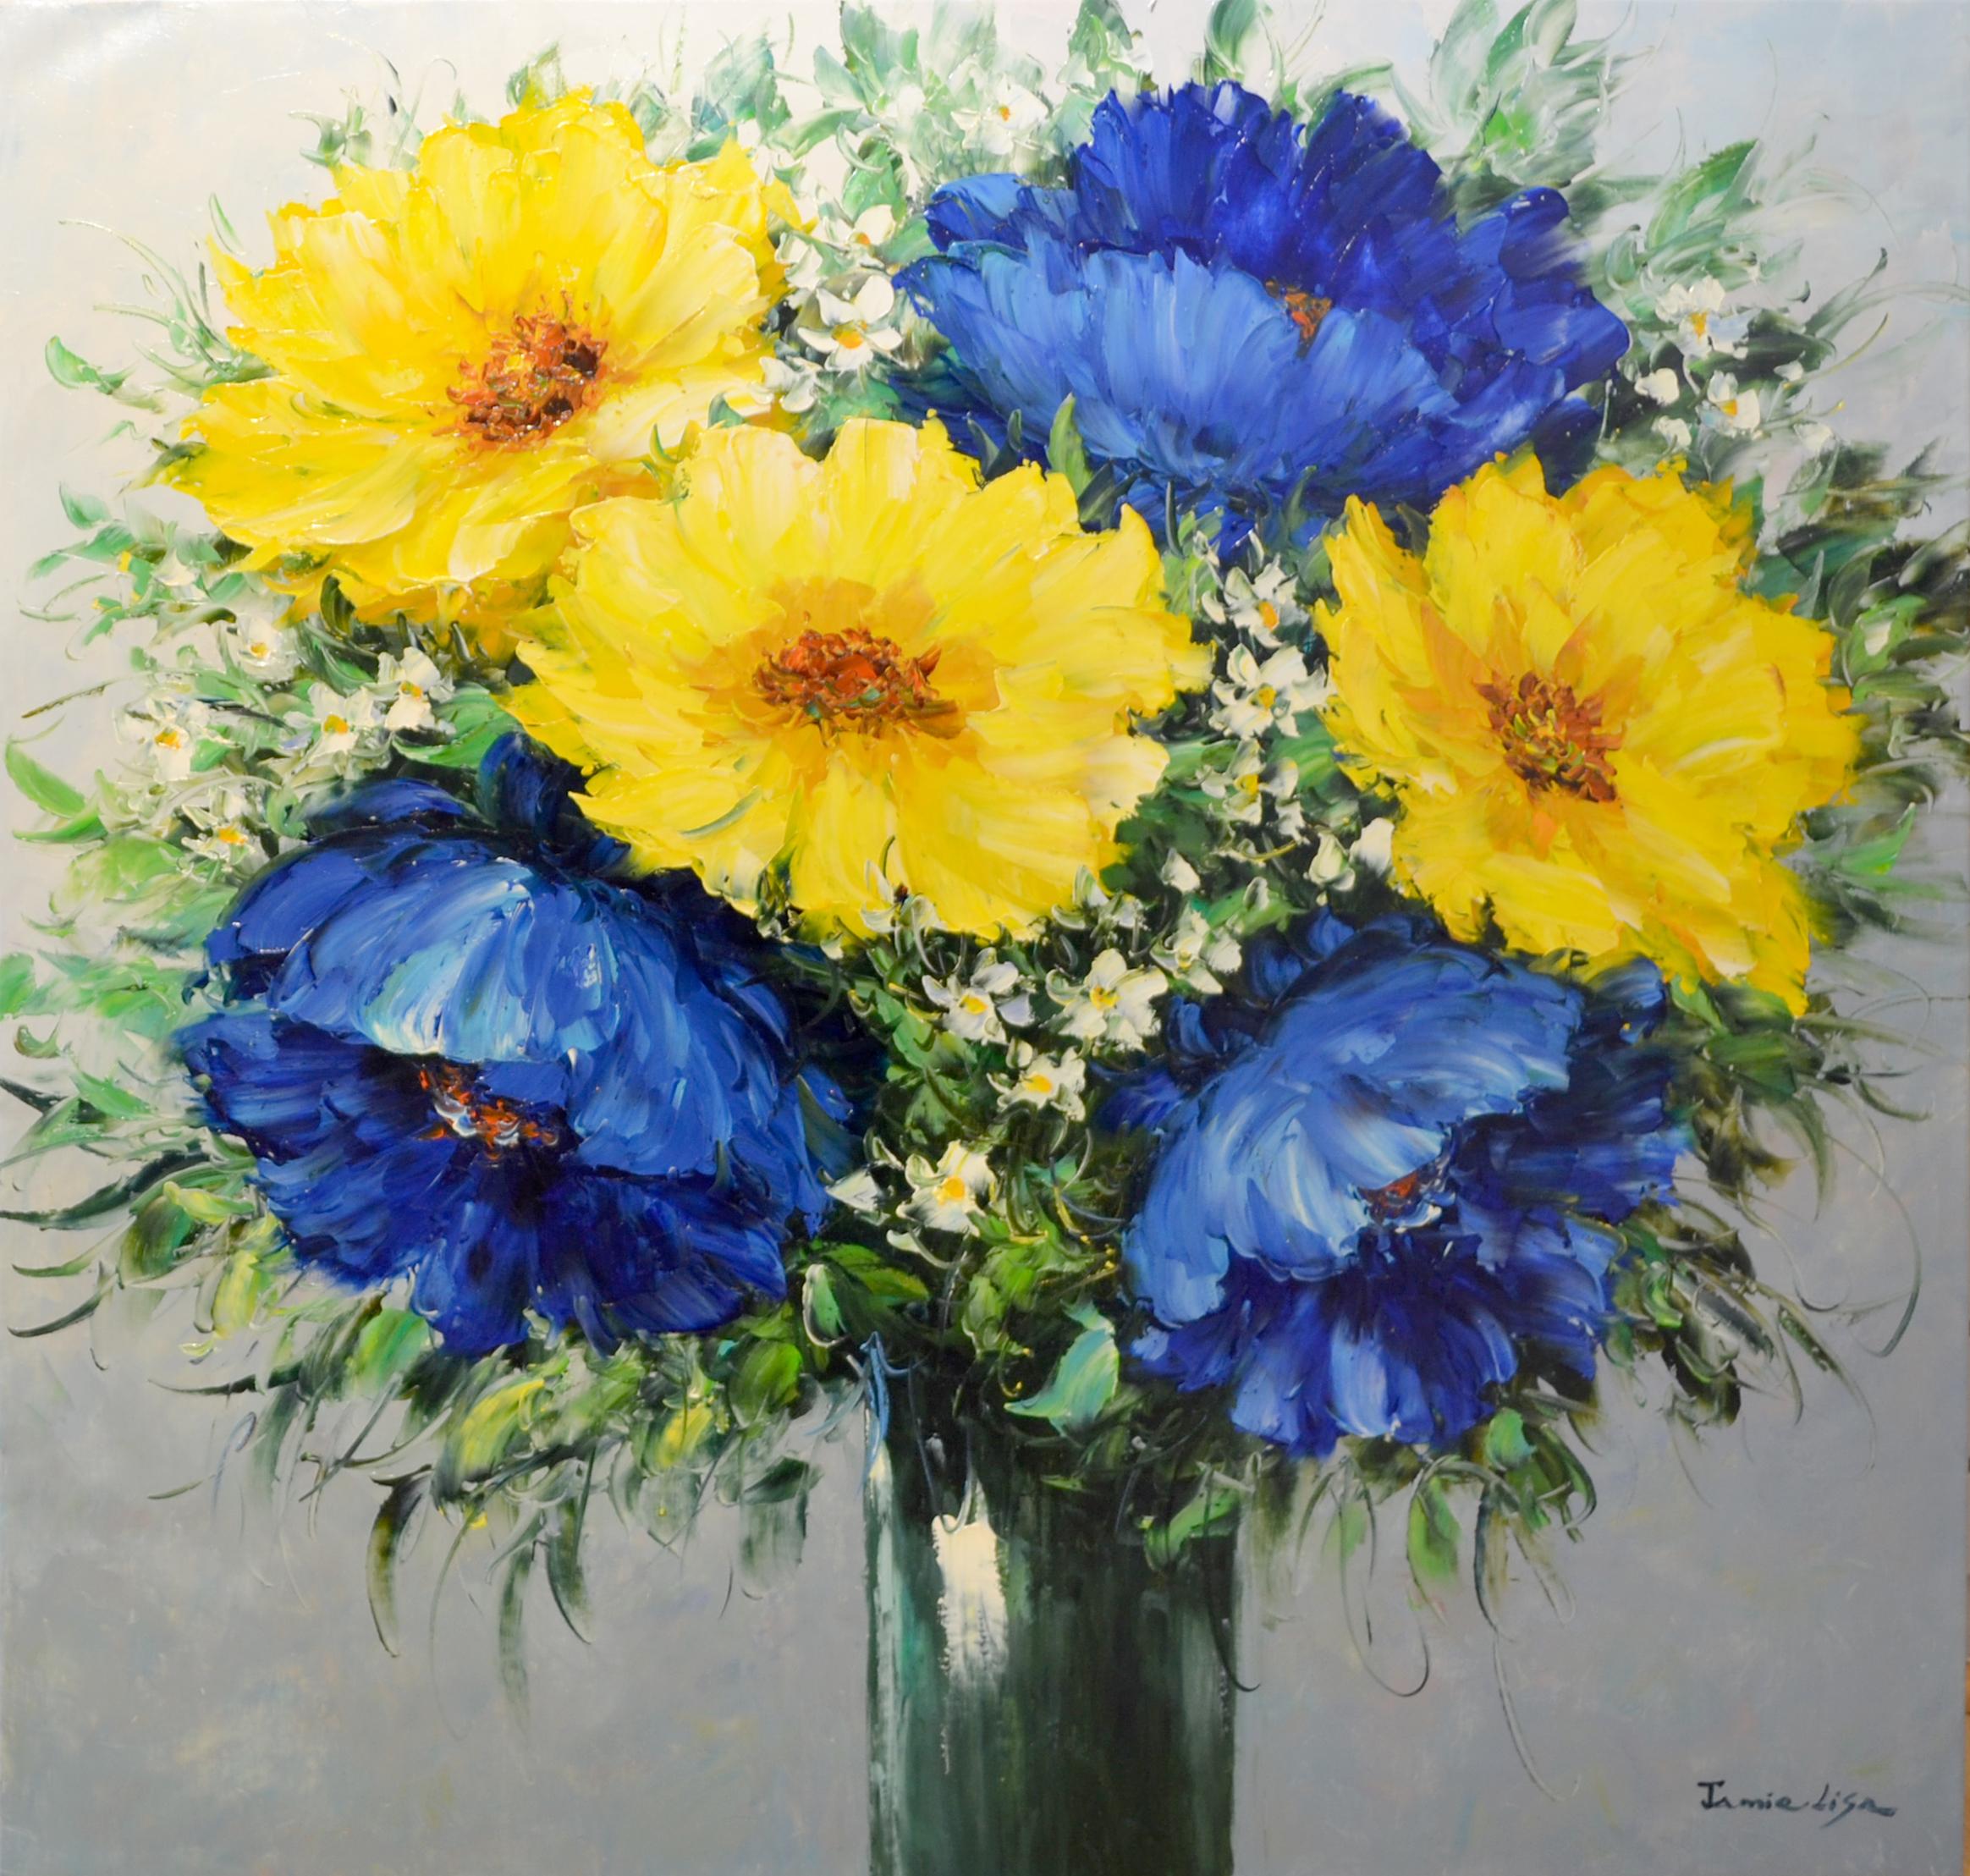 This piece "Blue and Yellow Poppies" is a 36x36 original oil painting on canvas by artist Jamie Lisa. Feature is a still life painting  of a floral spray of blue and yellow poppies. Lisa's technique creates a vibrant impressionistic style with thick